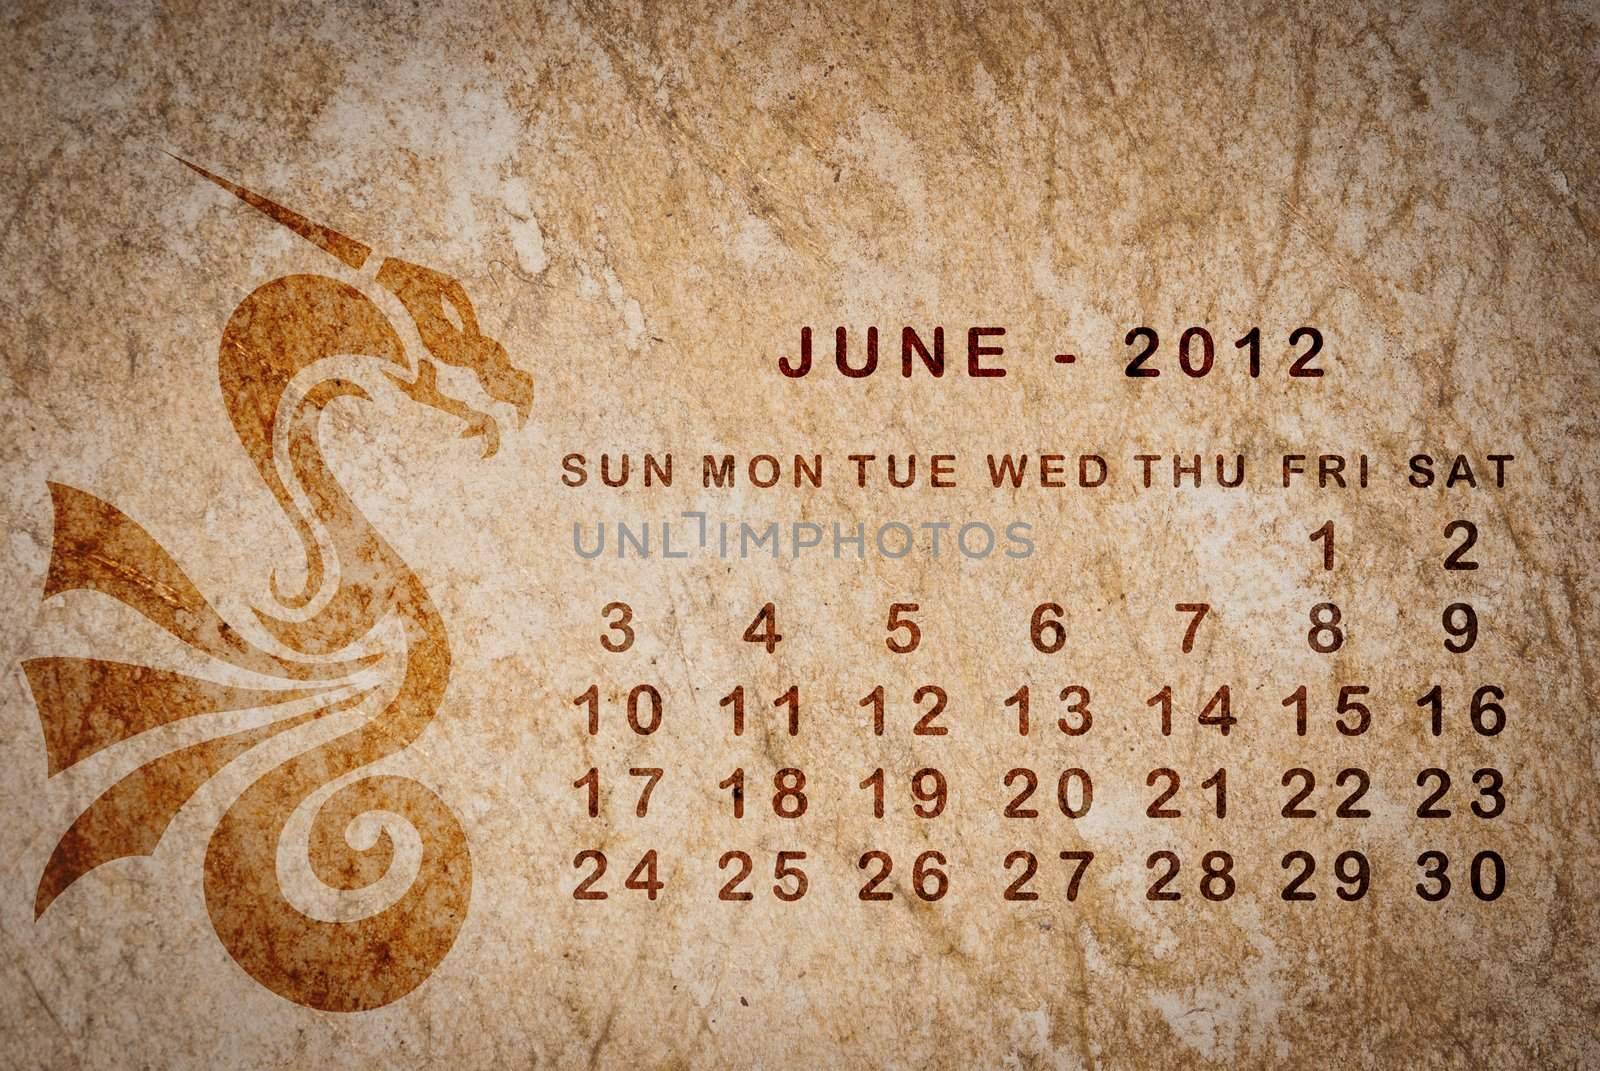 2012 year of the Dragon calendar on old vintage paper, June